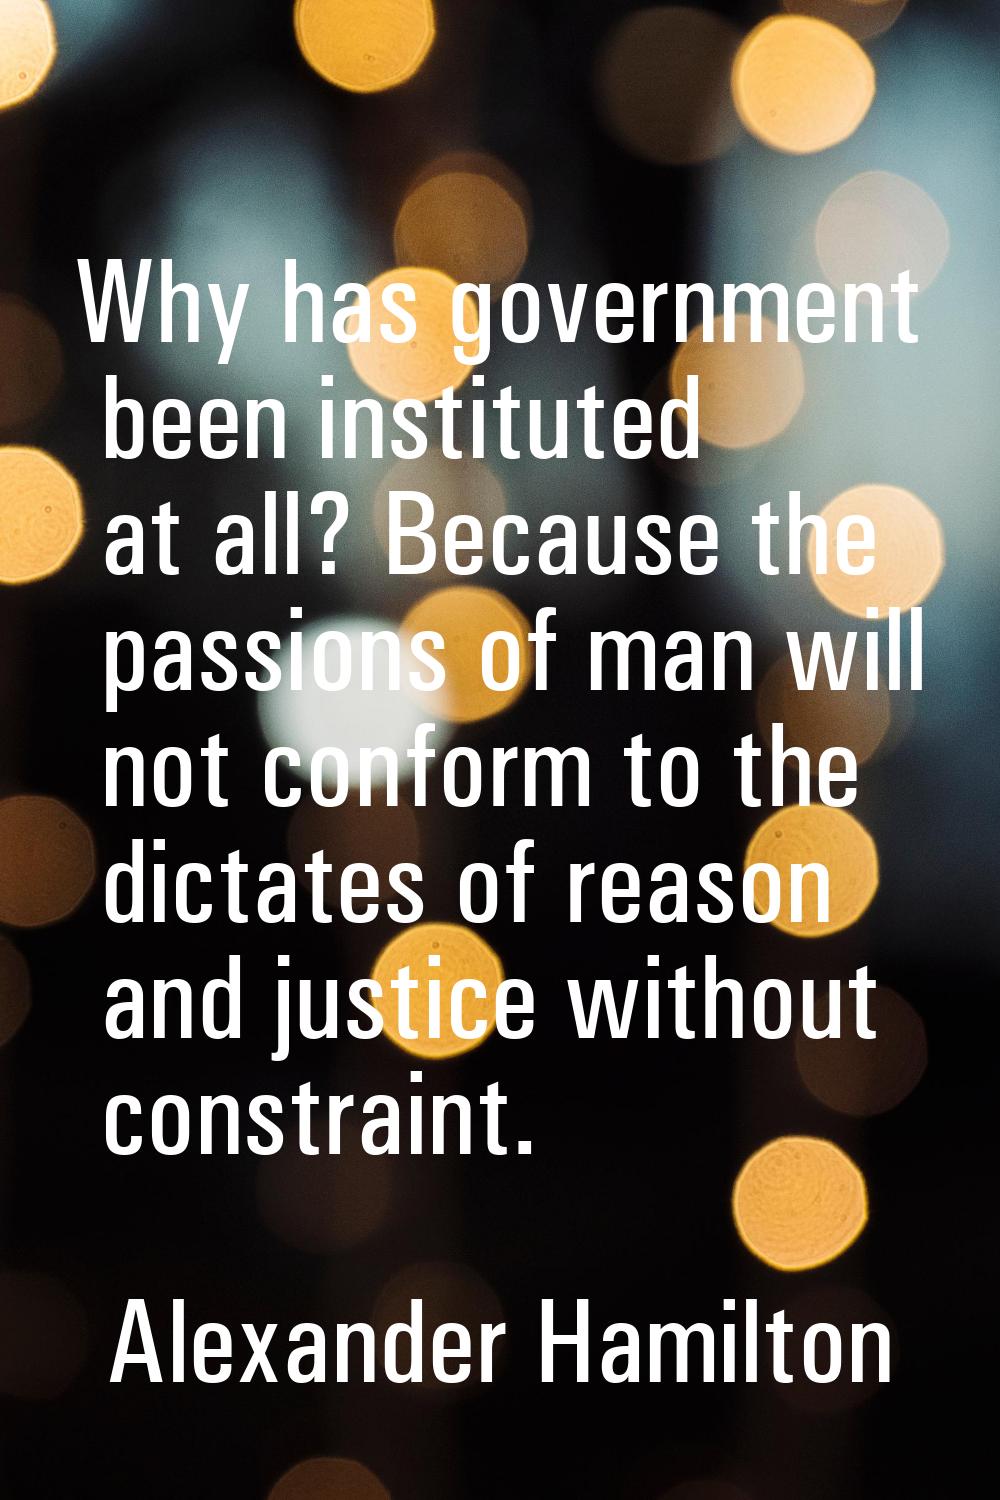 Why has government been instituted at all? Because the passions of man will not conform to the dict